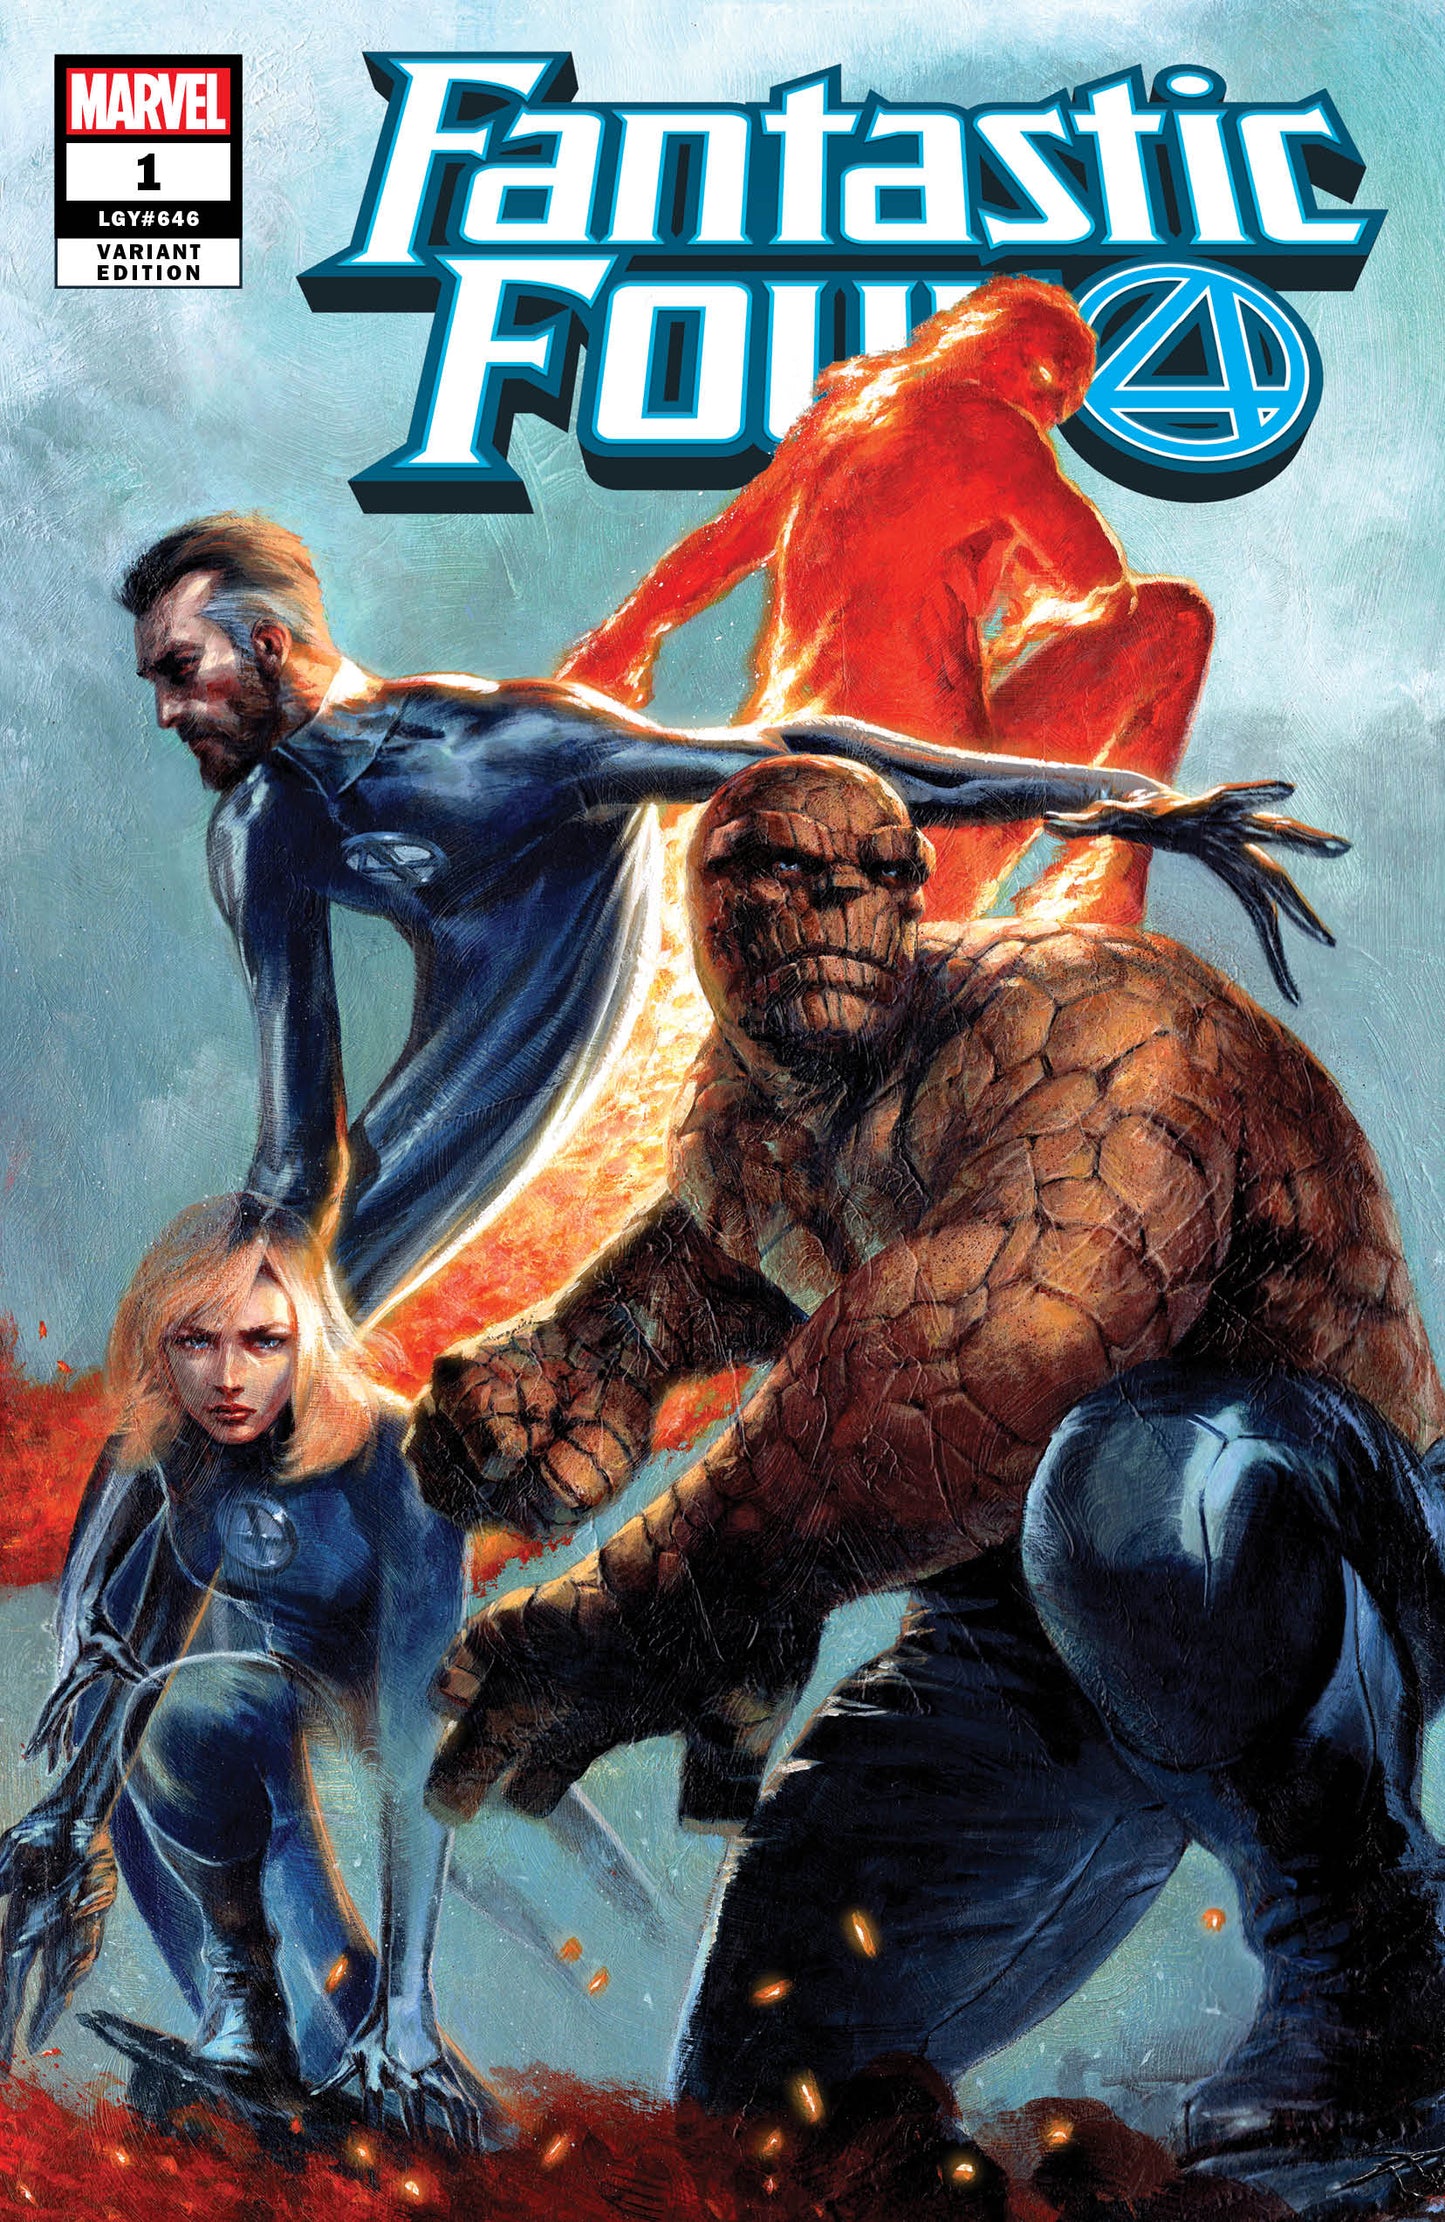 FANTASTIC FOUR #1 GABRIELE DELL'OTTO TRADE/VIRGIN VARIANT SET LIMITED TO 1000